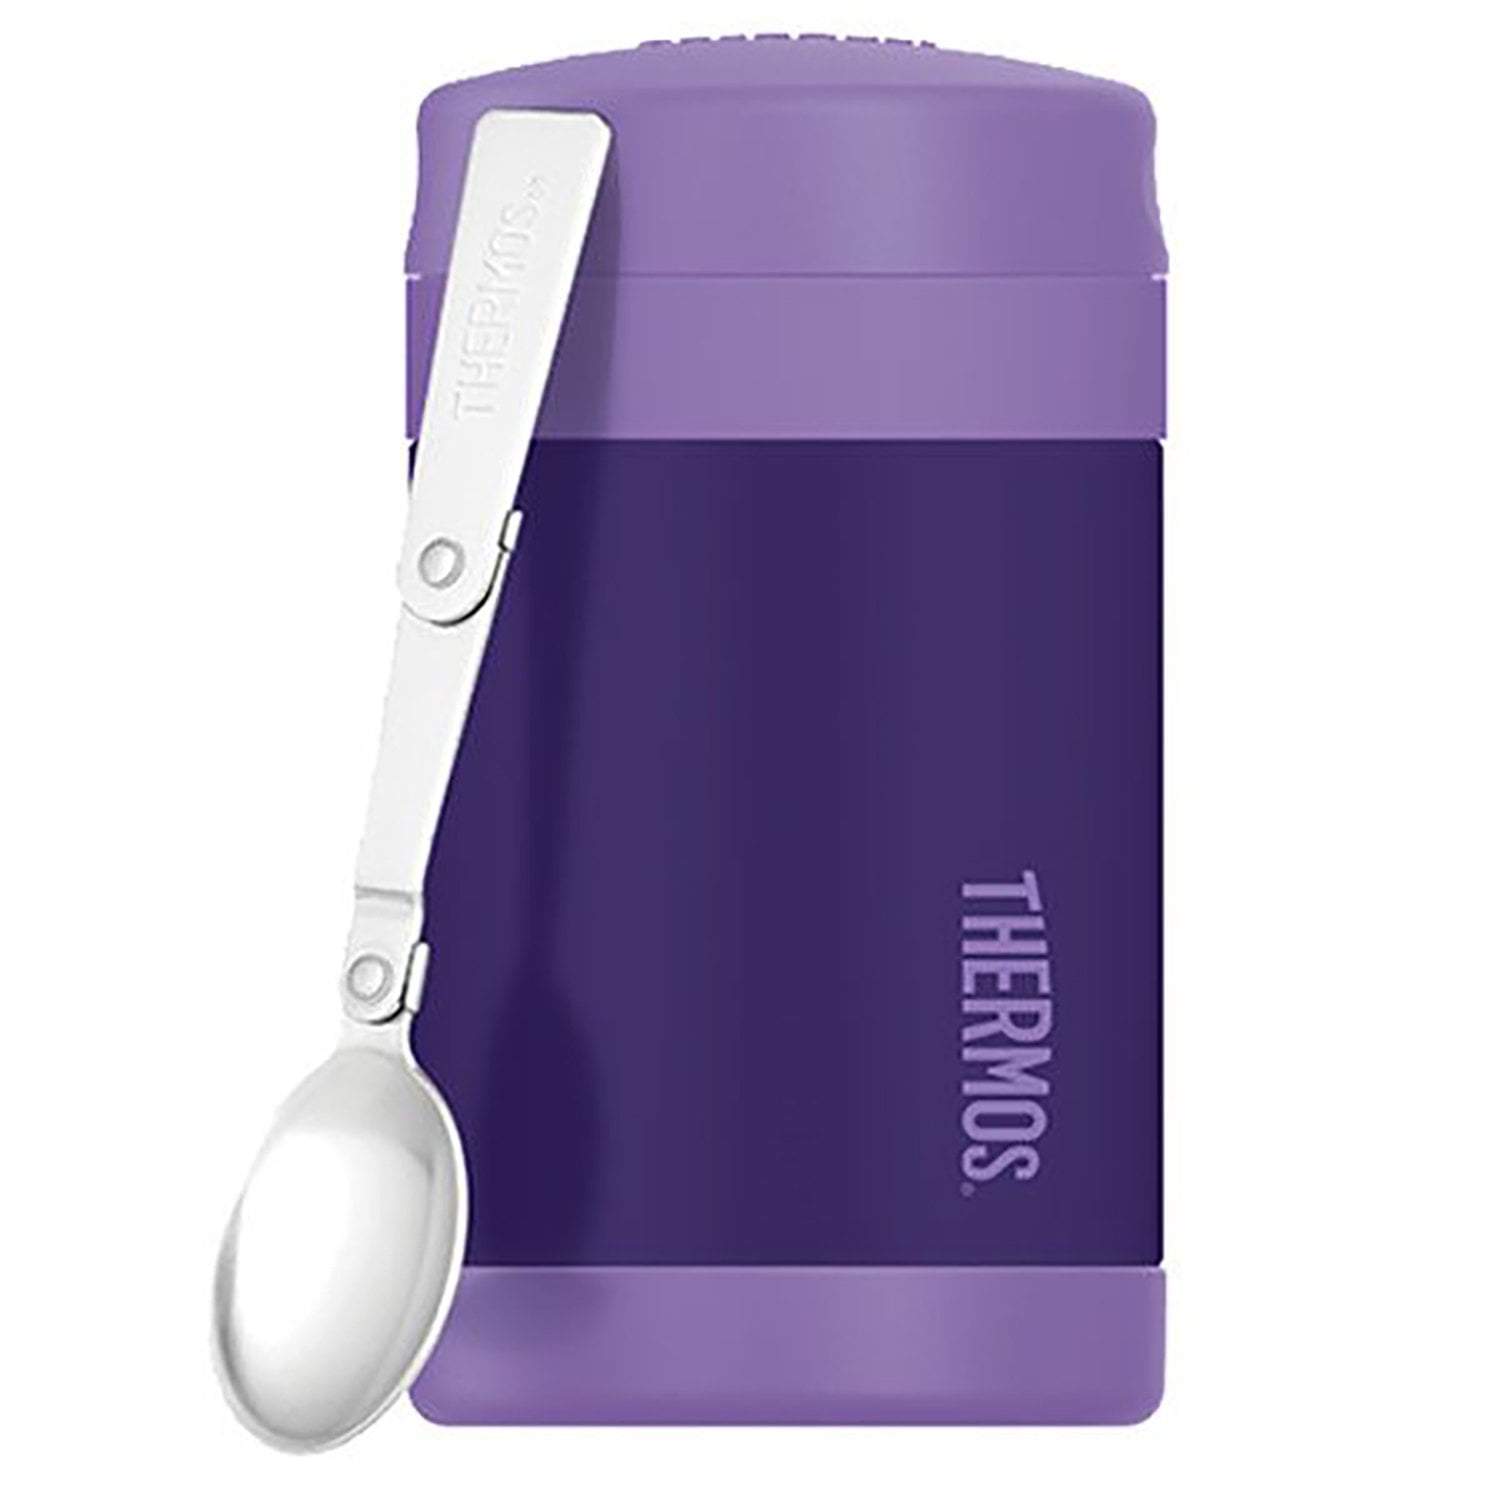 https://cdn.shopify.com/s/files/1/1416/1268/products/thermos-funtainer-stainless-steel-vacuum-insulated-food-jar-470ml-purple-15137102200913.jpg?v=1648181740&width=1500